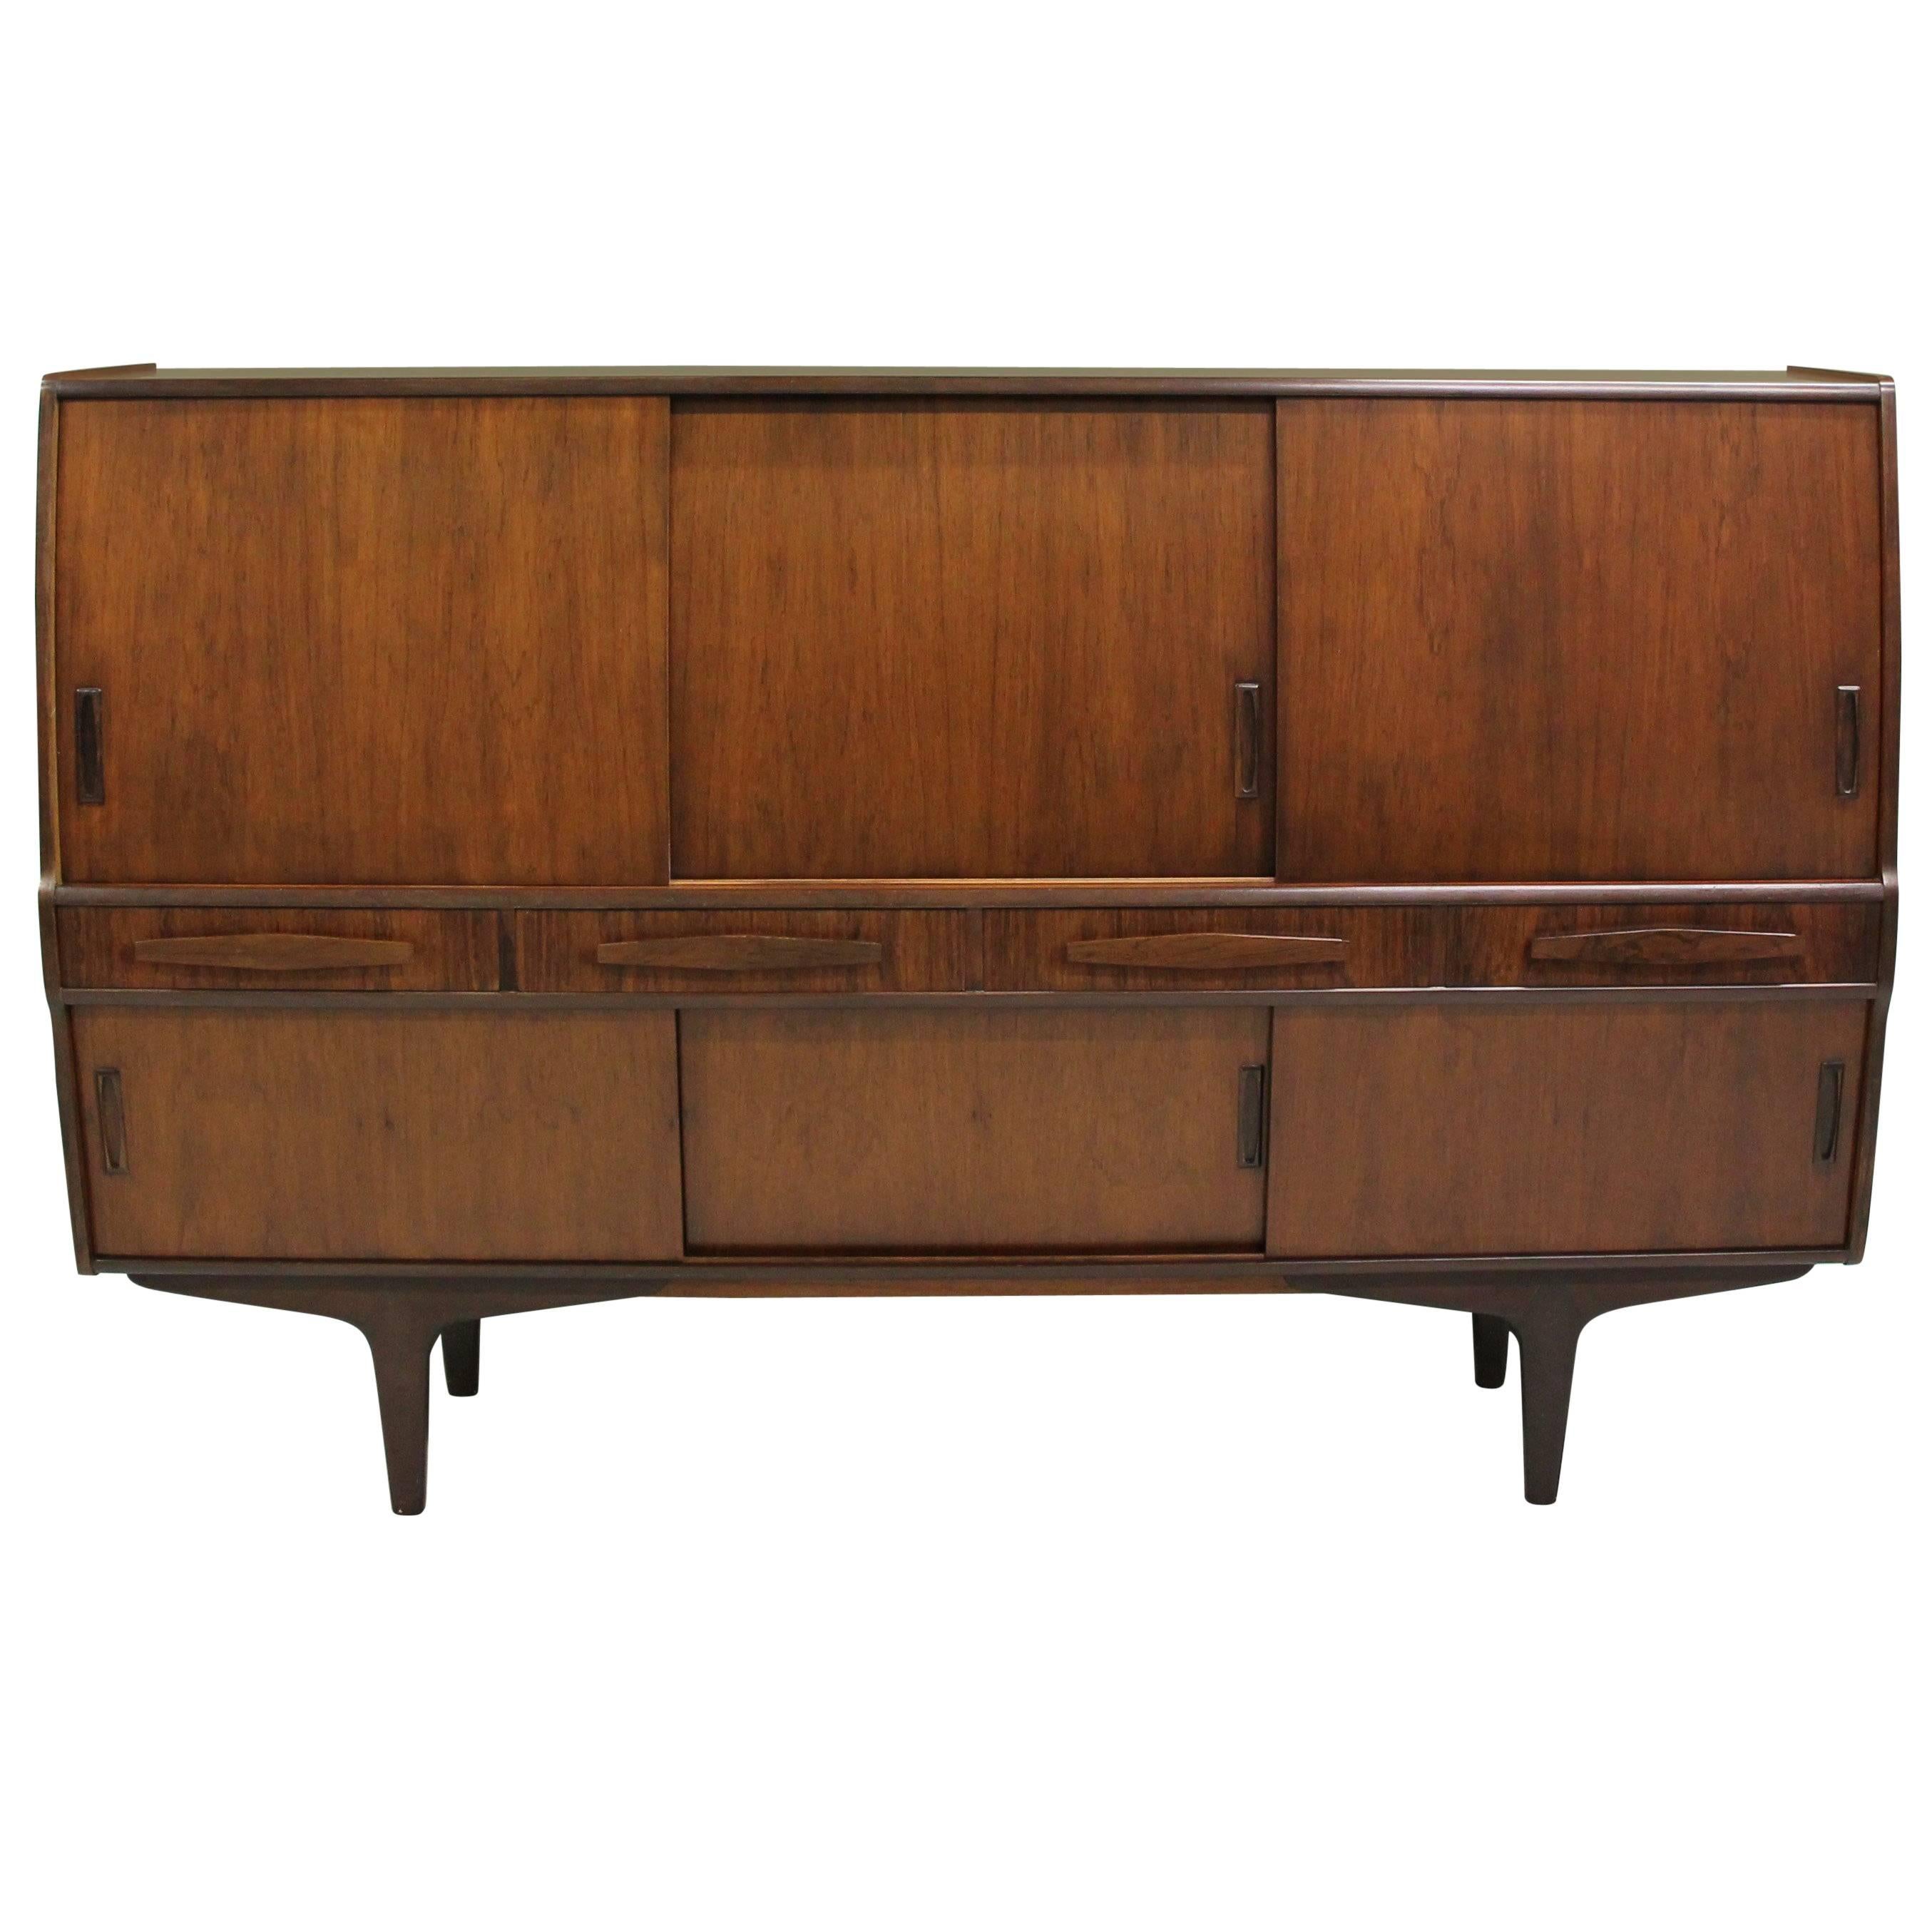 Poul M. Jessen Rosewood Sideboard, 1950 For Sale